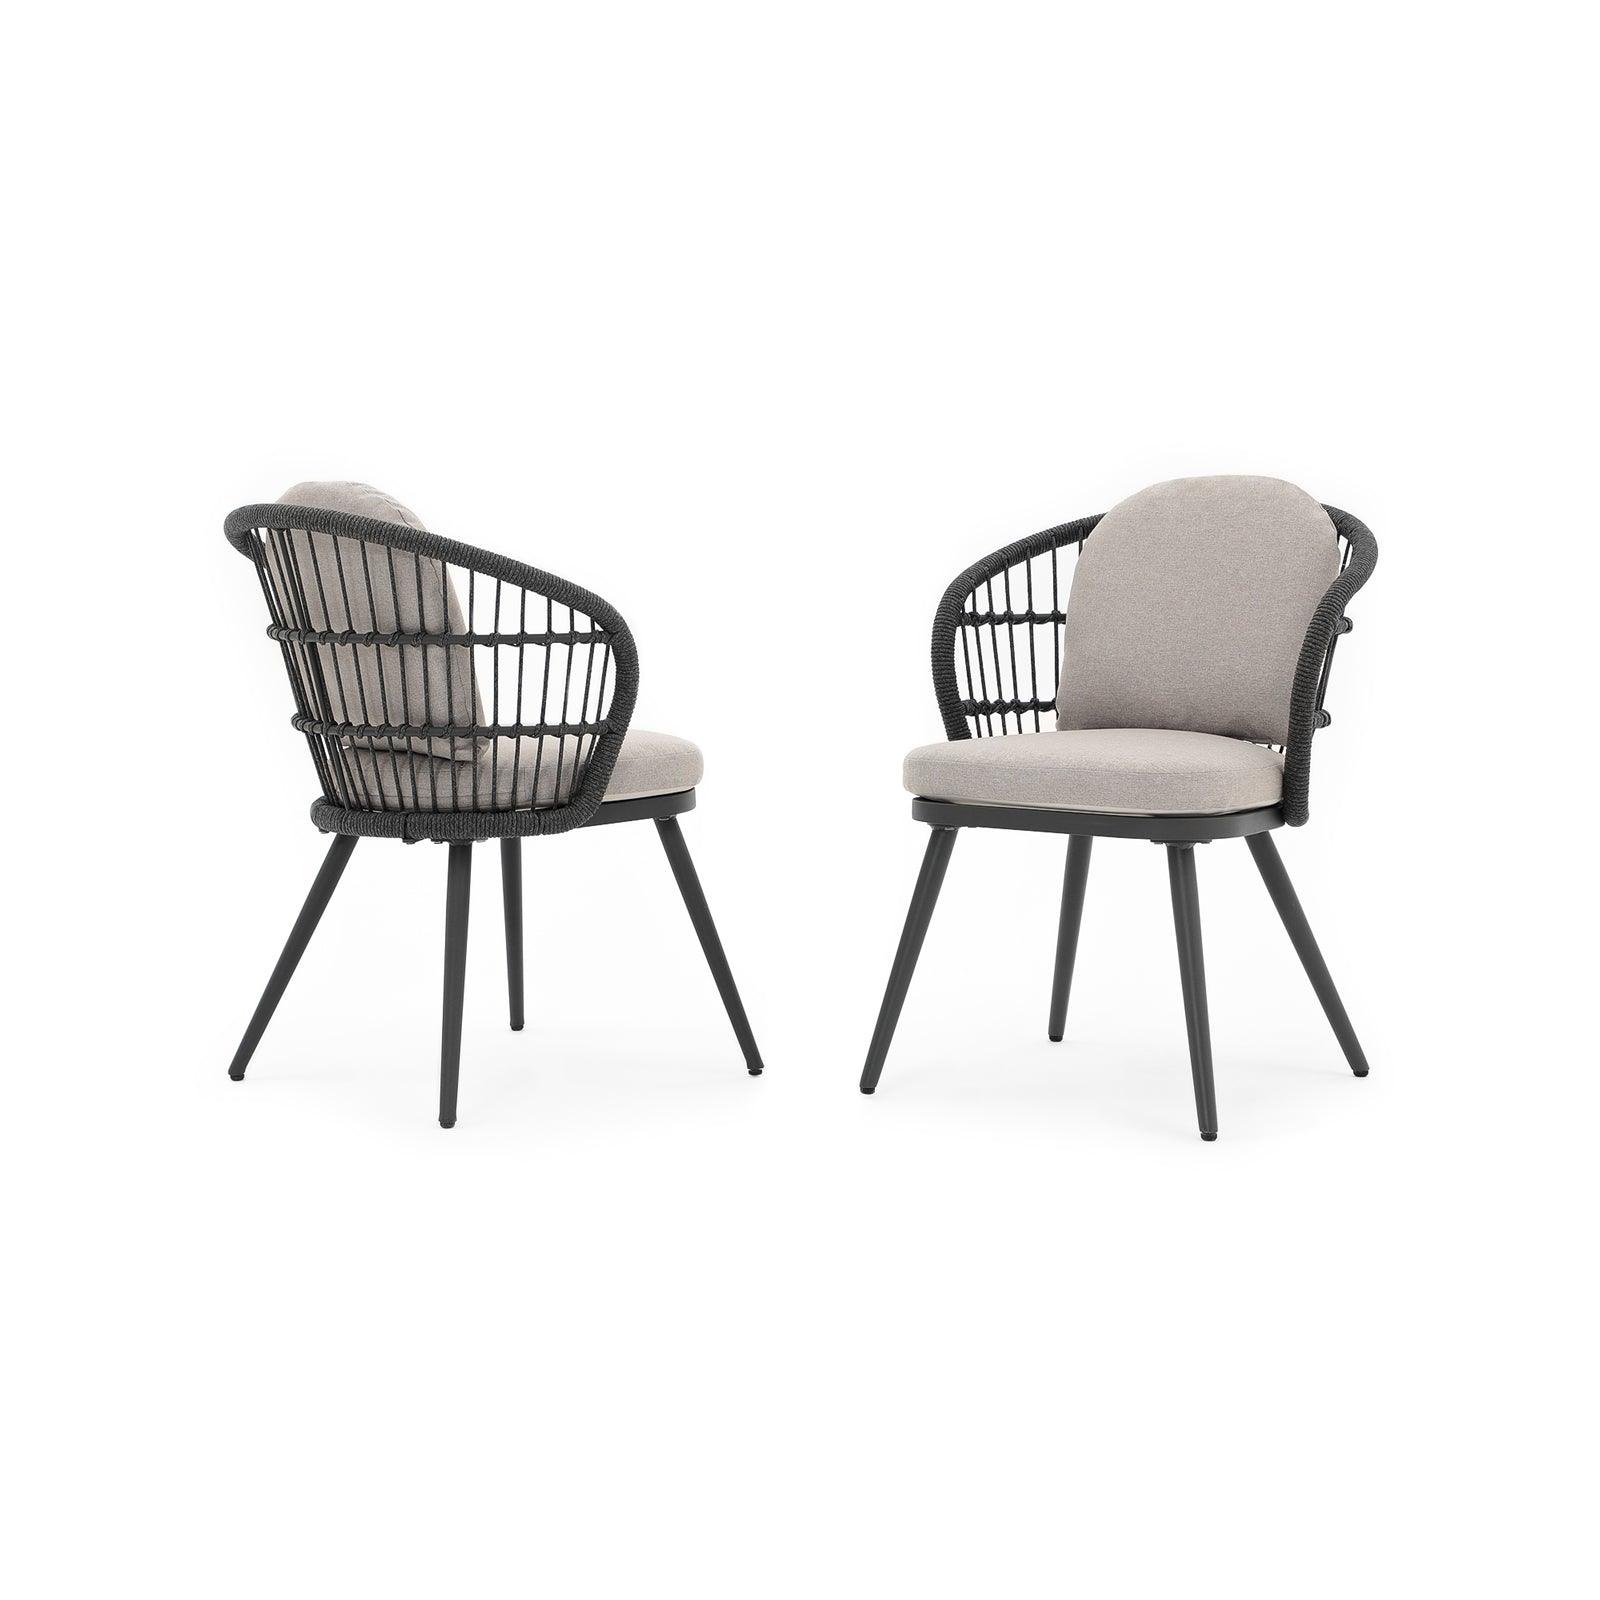 Comino Modern Rope Outdoor Furniture, 2-Piece dark grey aluminum frame dining chairs with backrest rope design and light grey cushions, side view - Jardina Furniture#Pieces_2-pc.